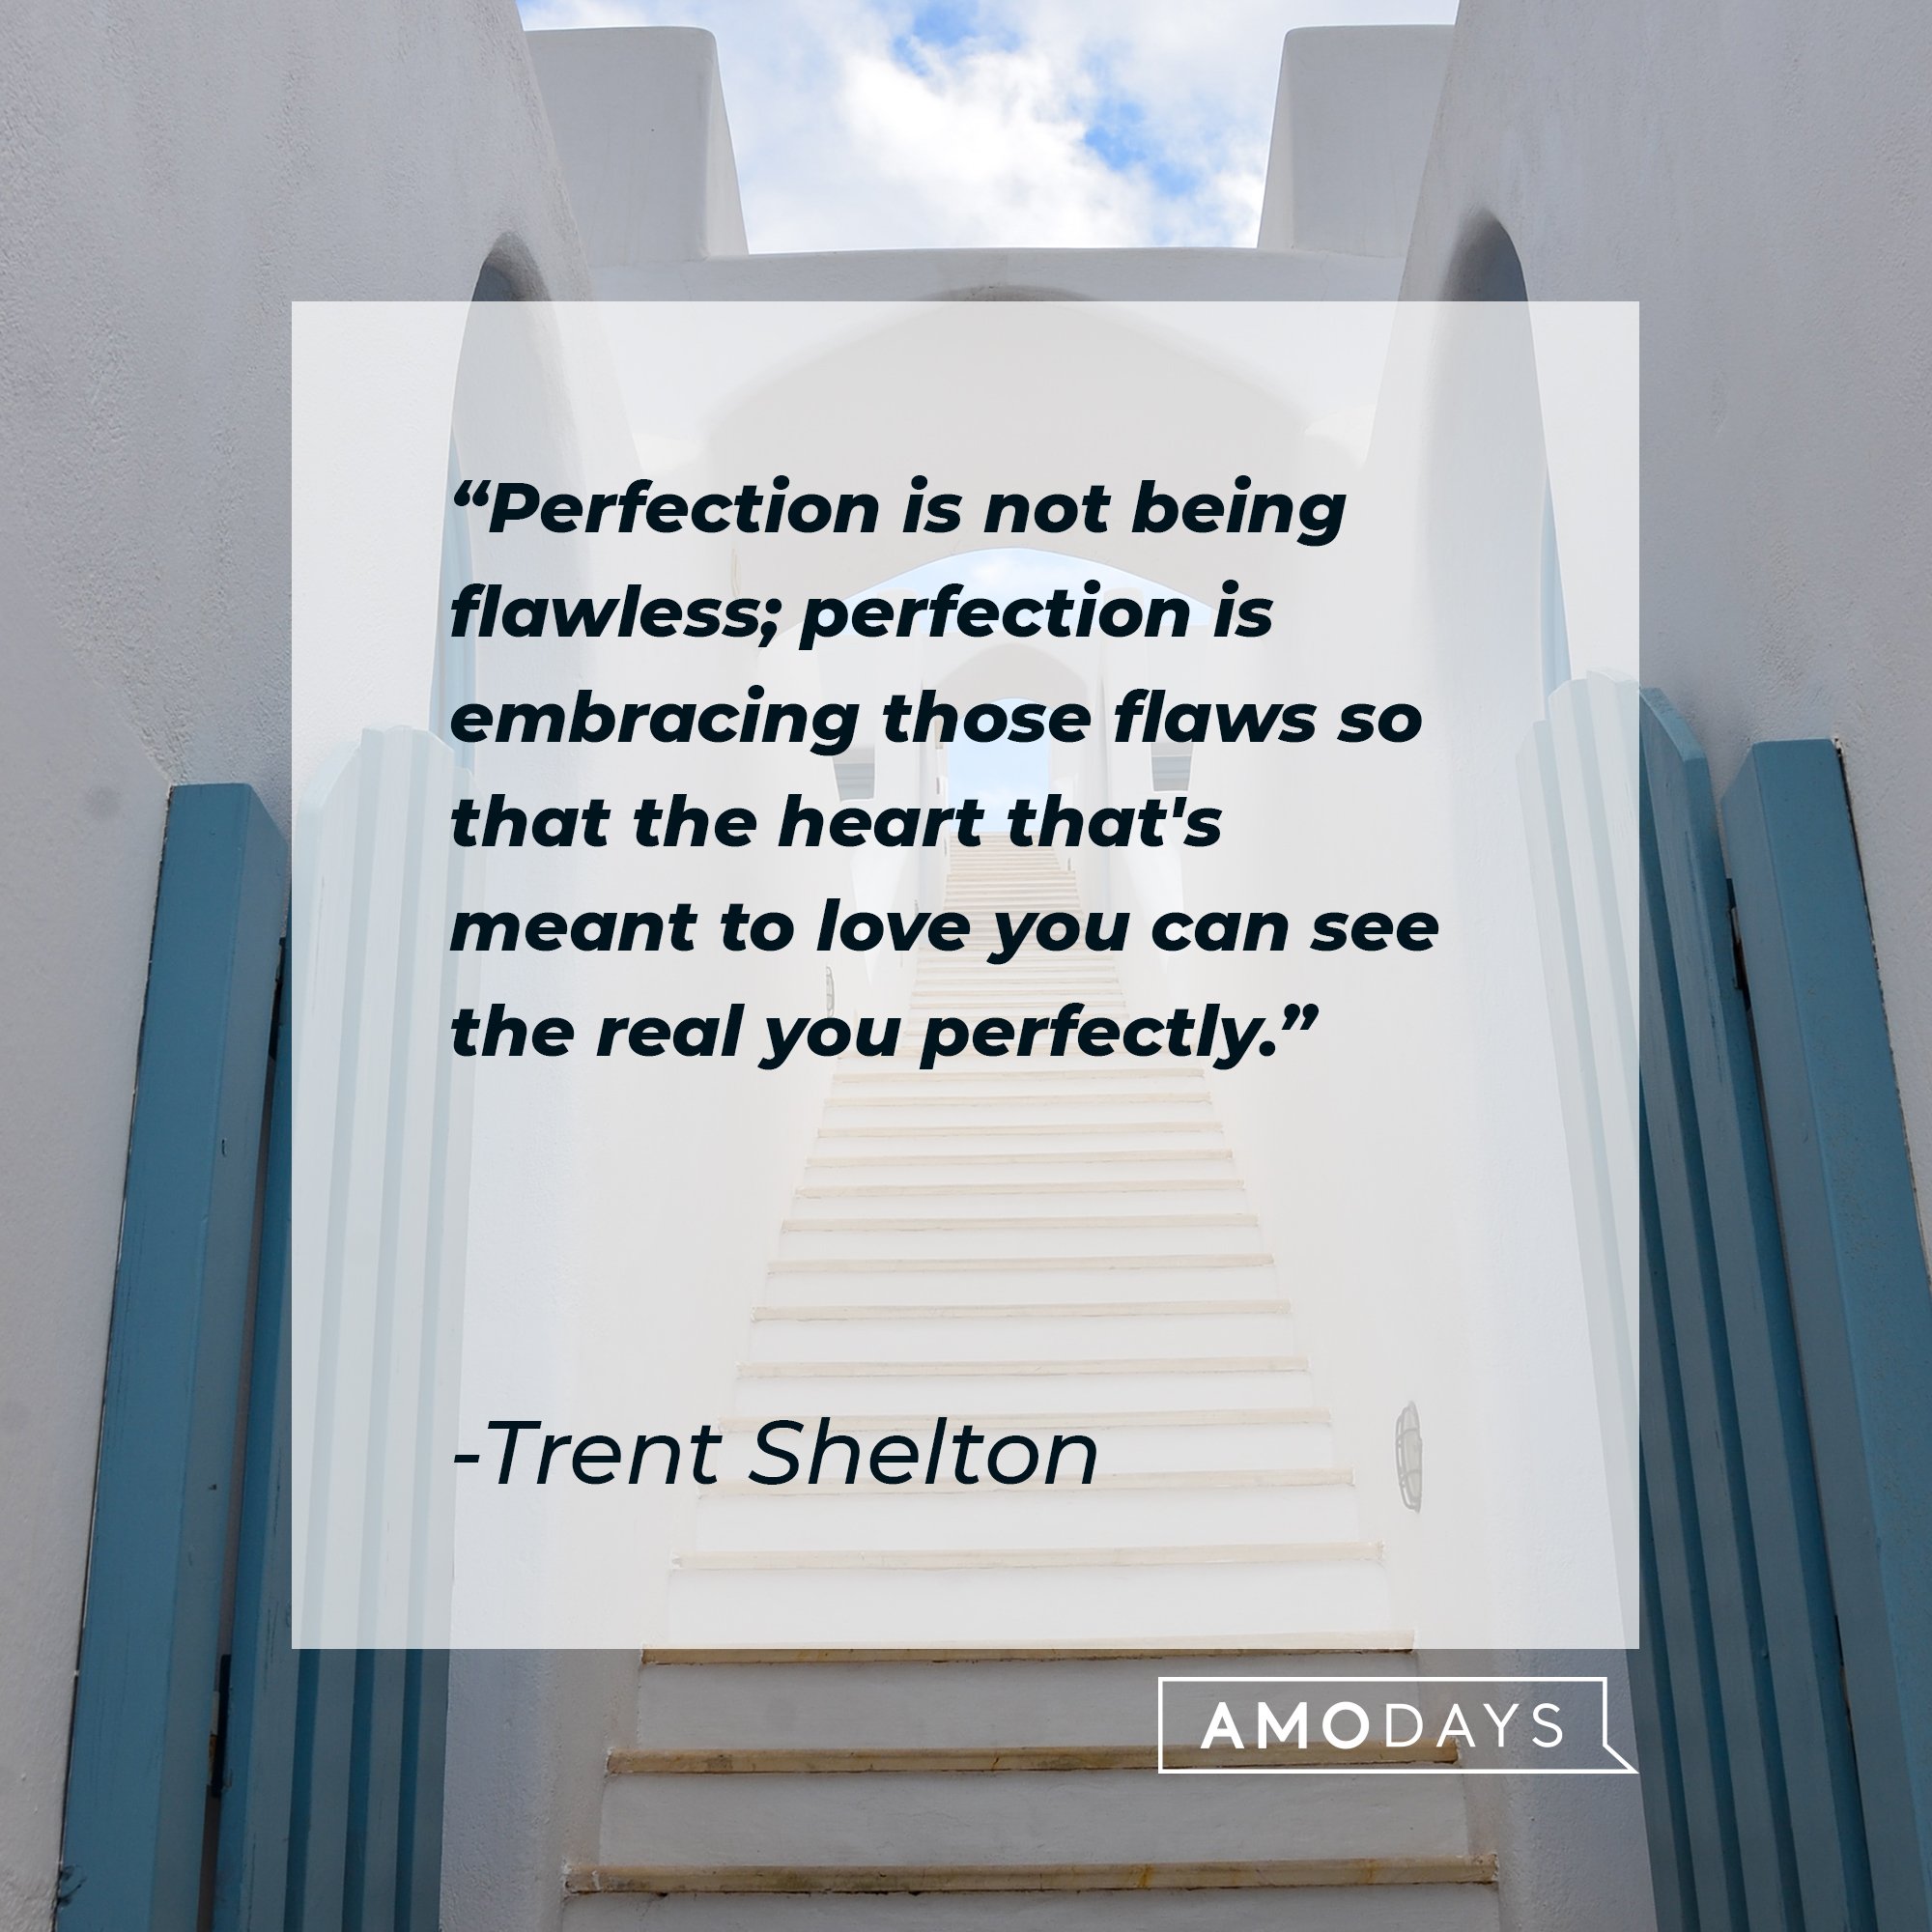 Trent Shelton's quote: "Perfection is not being flawless; perfection is embracing those flaws so that the heart that's meant to love you can see the real you perfectly." | Image: AmoDays